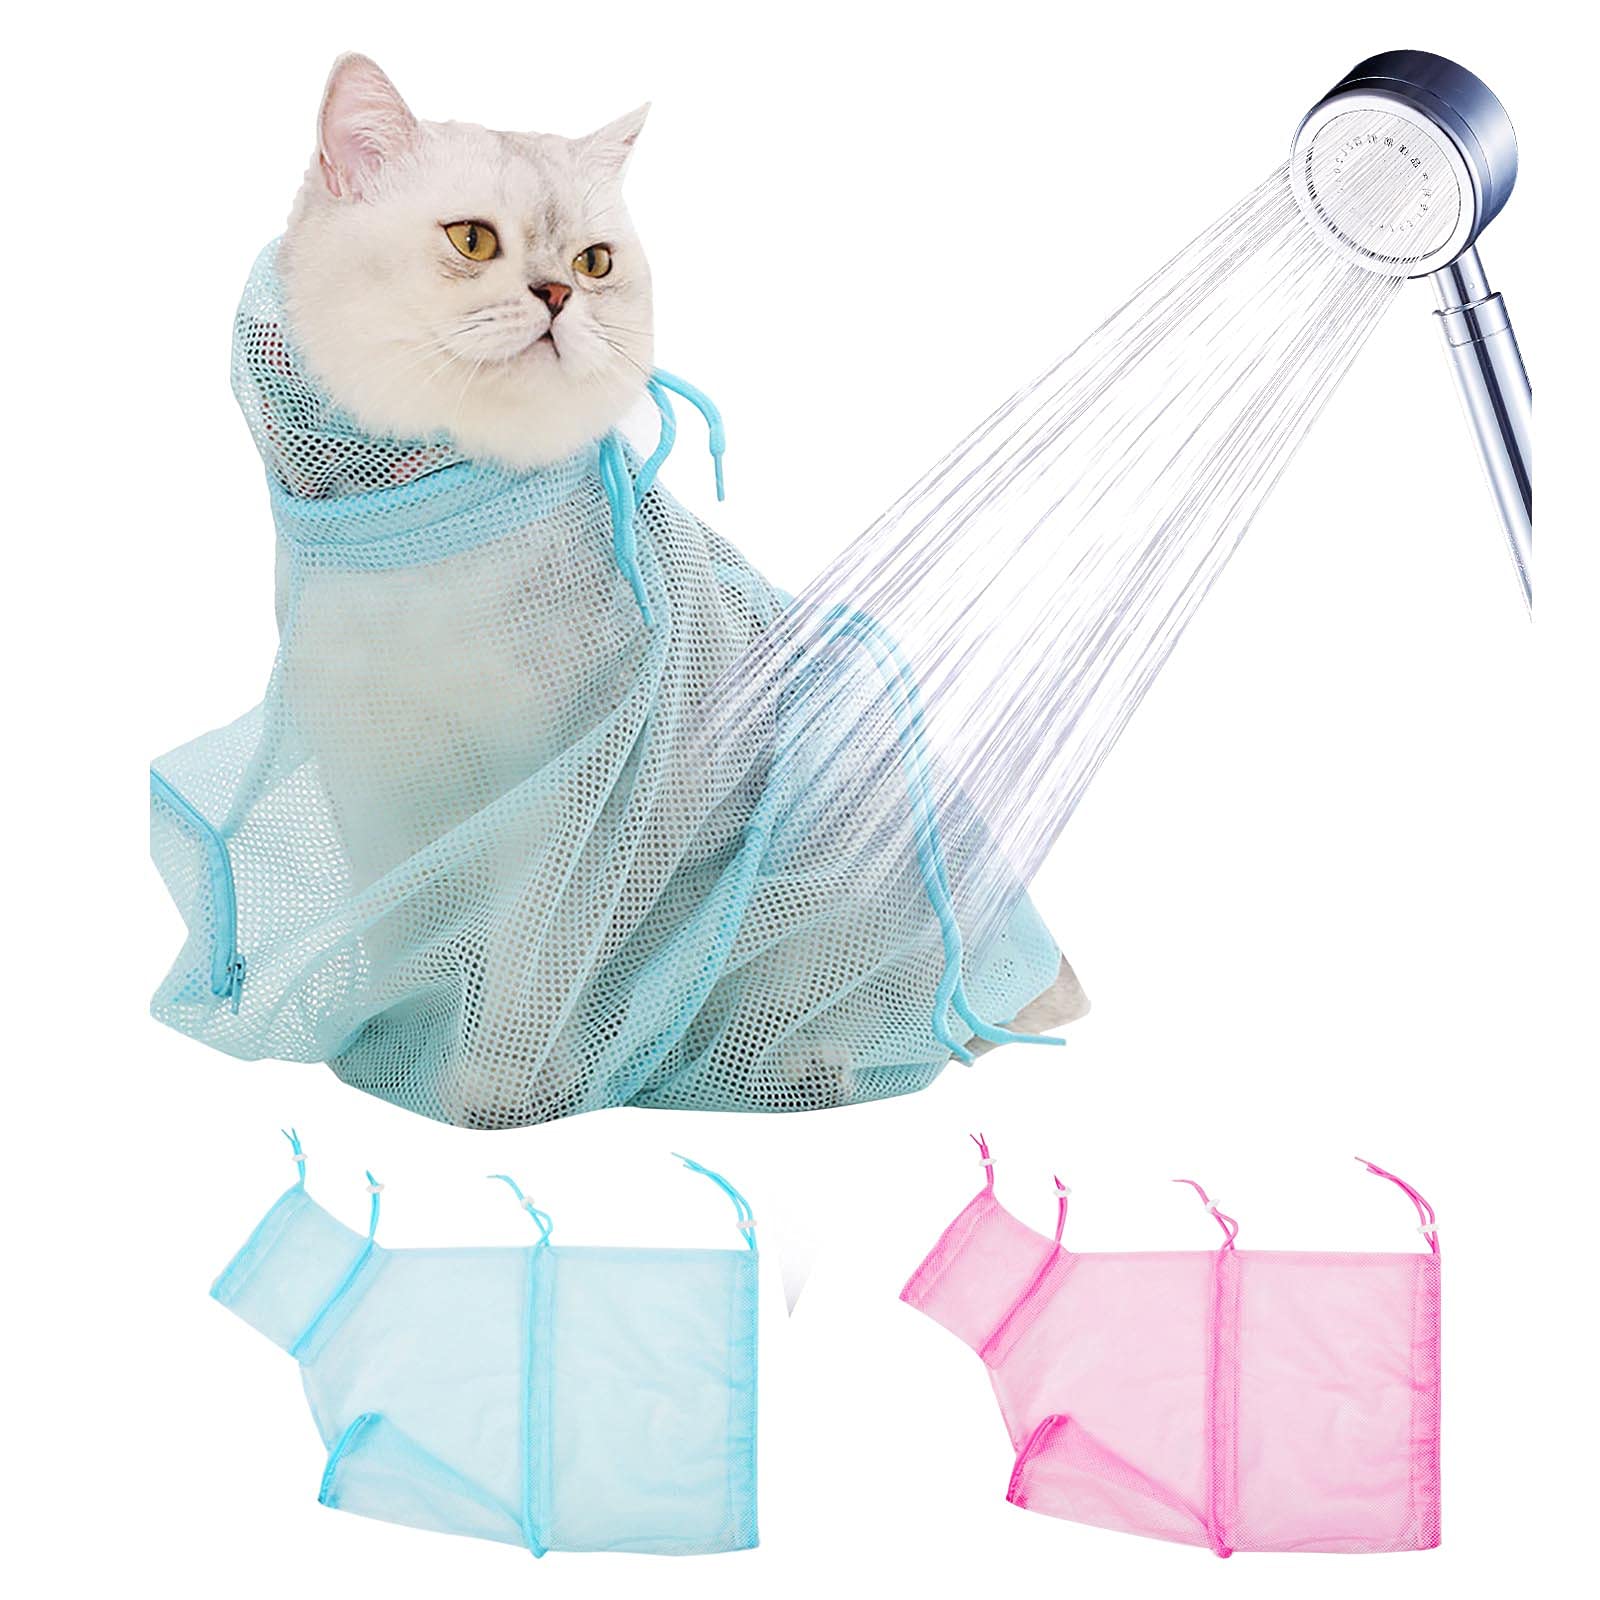 HUKUNY Cat Bathing Bag, Multifunctional Cat Shower Net Bag Adjustable  Breathable Mesh Anti-bite & Scratch Grooming Bag for Cat & Little Dog,  Injecting Examining Nail Trimming Cat Bag Large - Blue